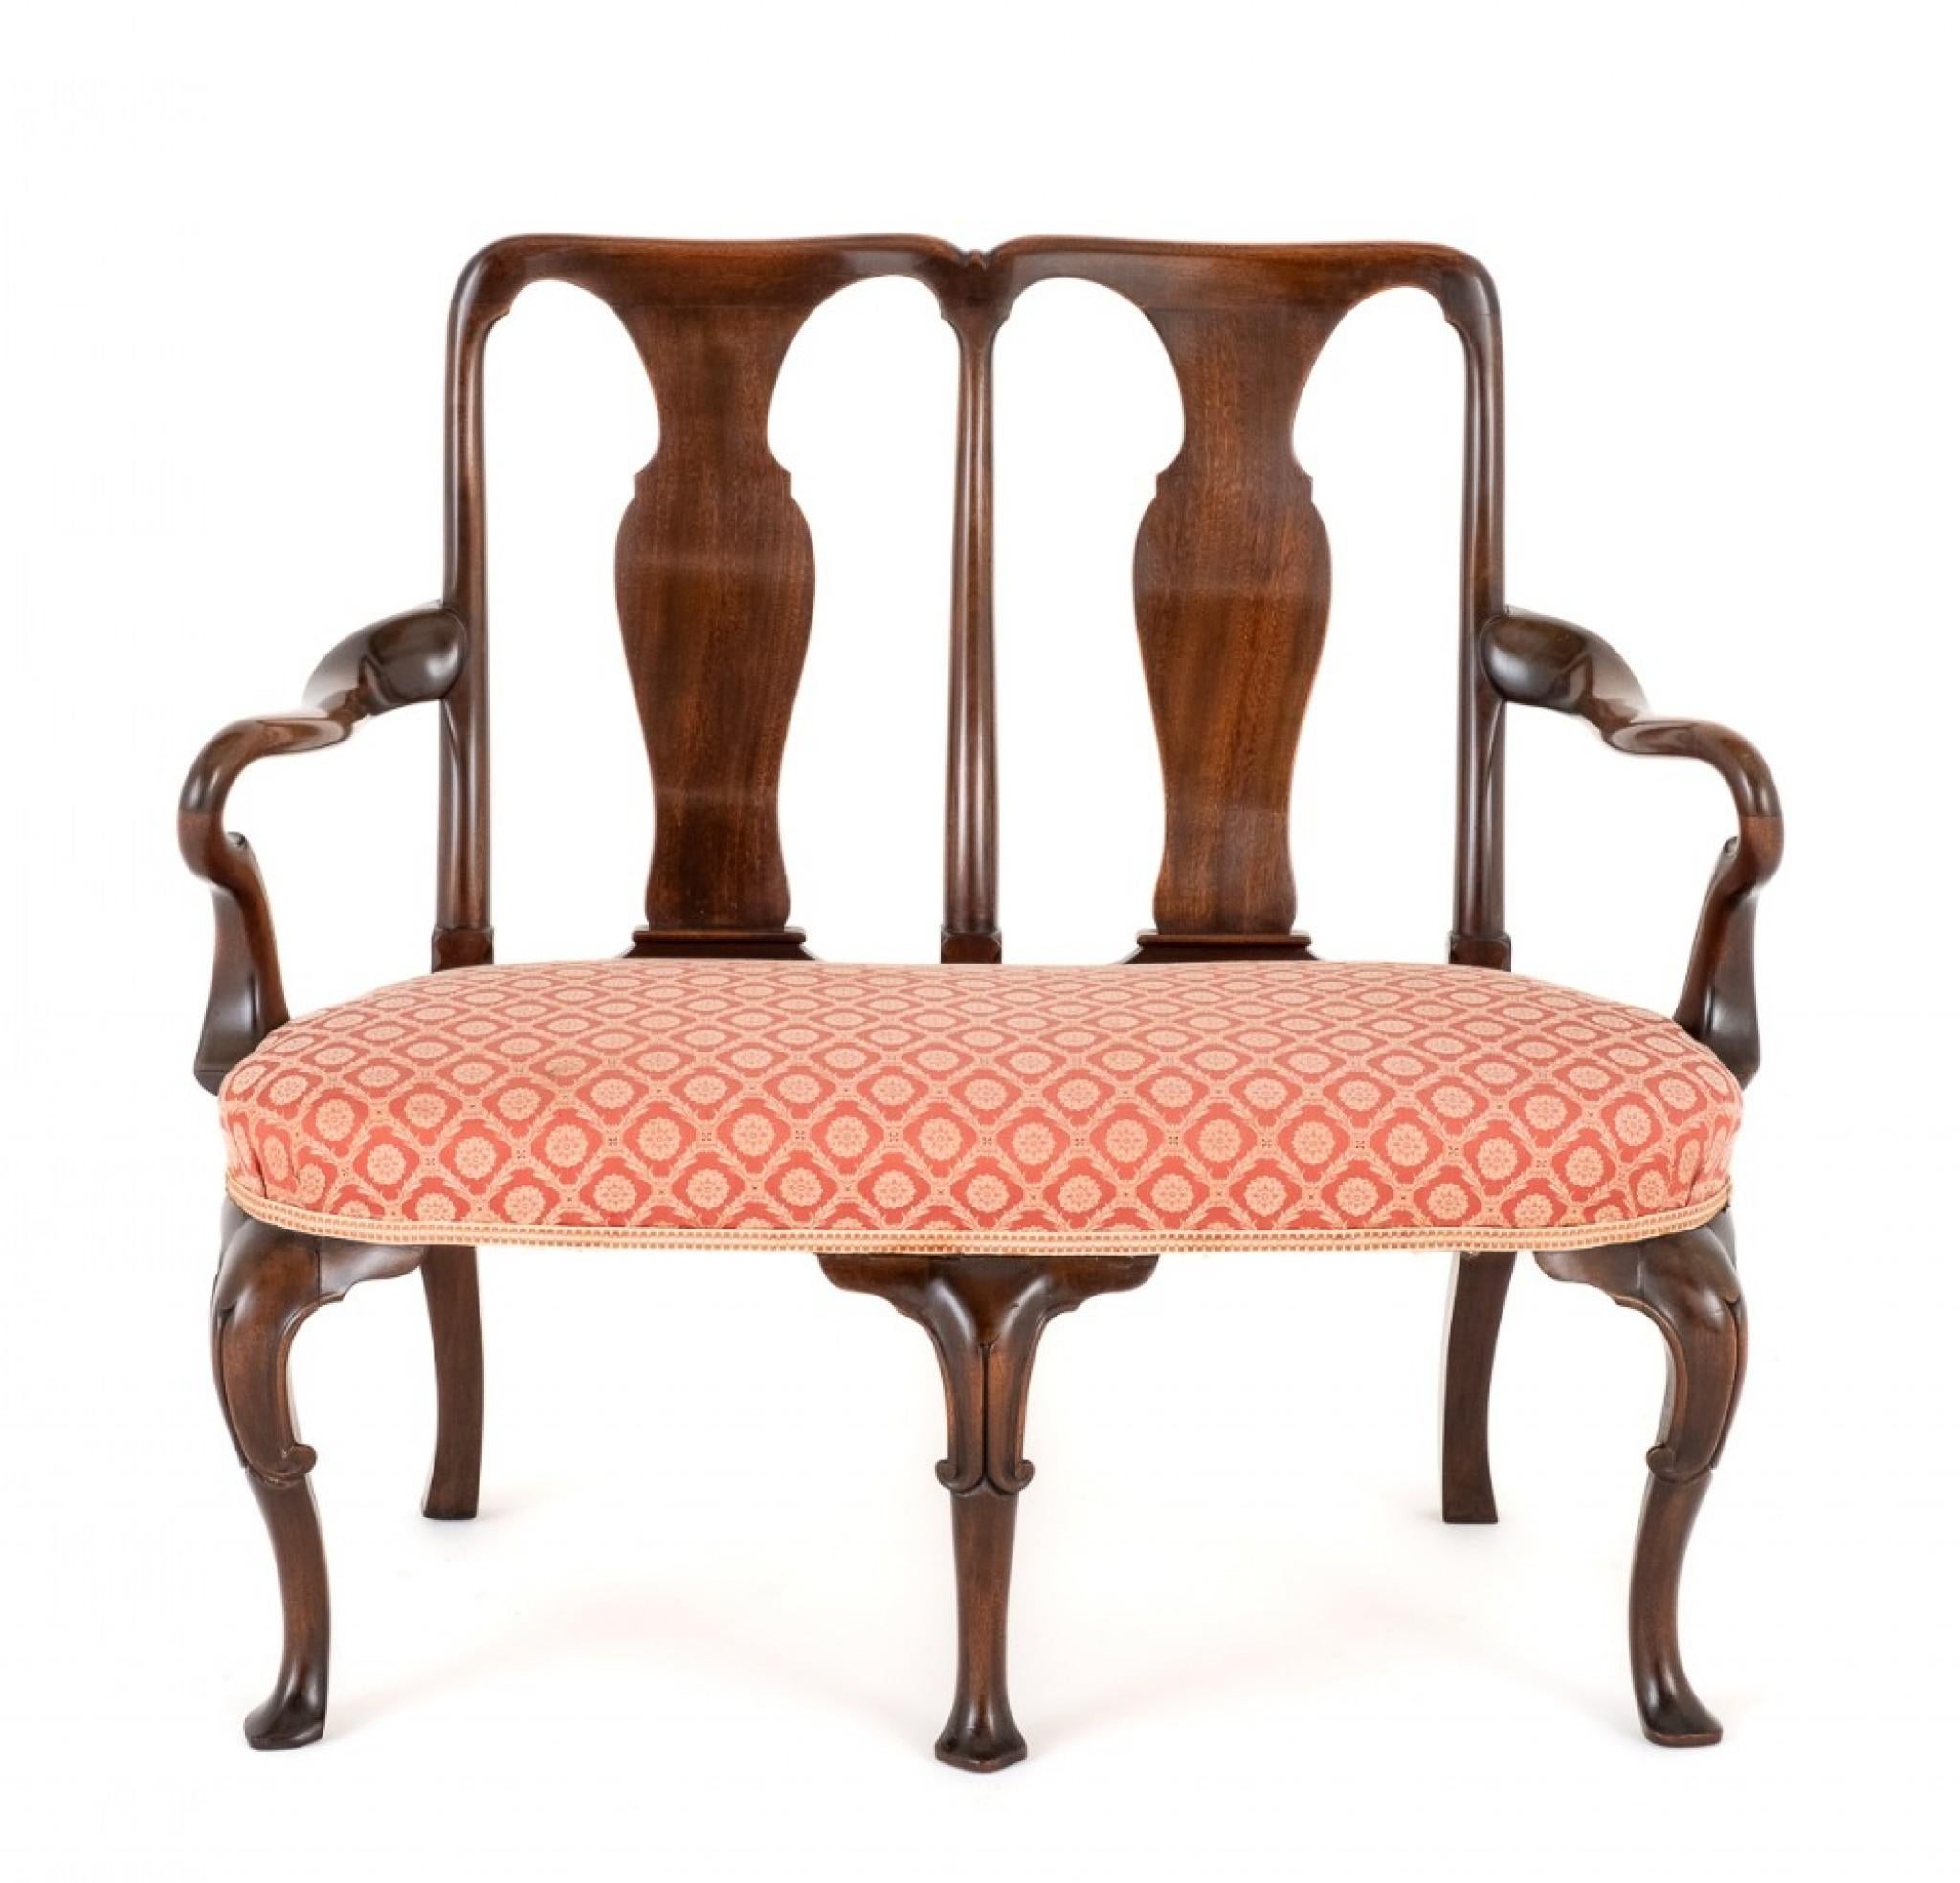 Mahogany Queen Anne Revival Settee.
The back of the settee being of a double chair form with a ventral splat and a shaped cresting rail.
circa 1880
The arms being of a typical queen anne shepherd crook style.
The cabriole front legs having